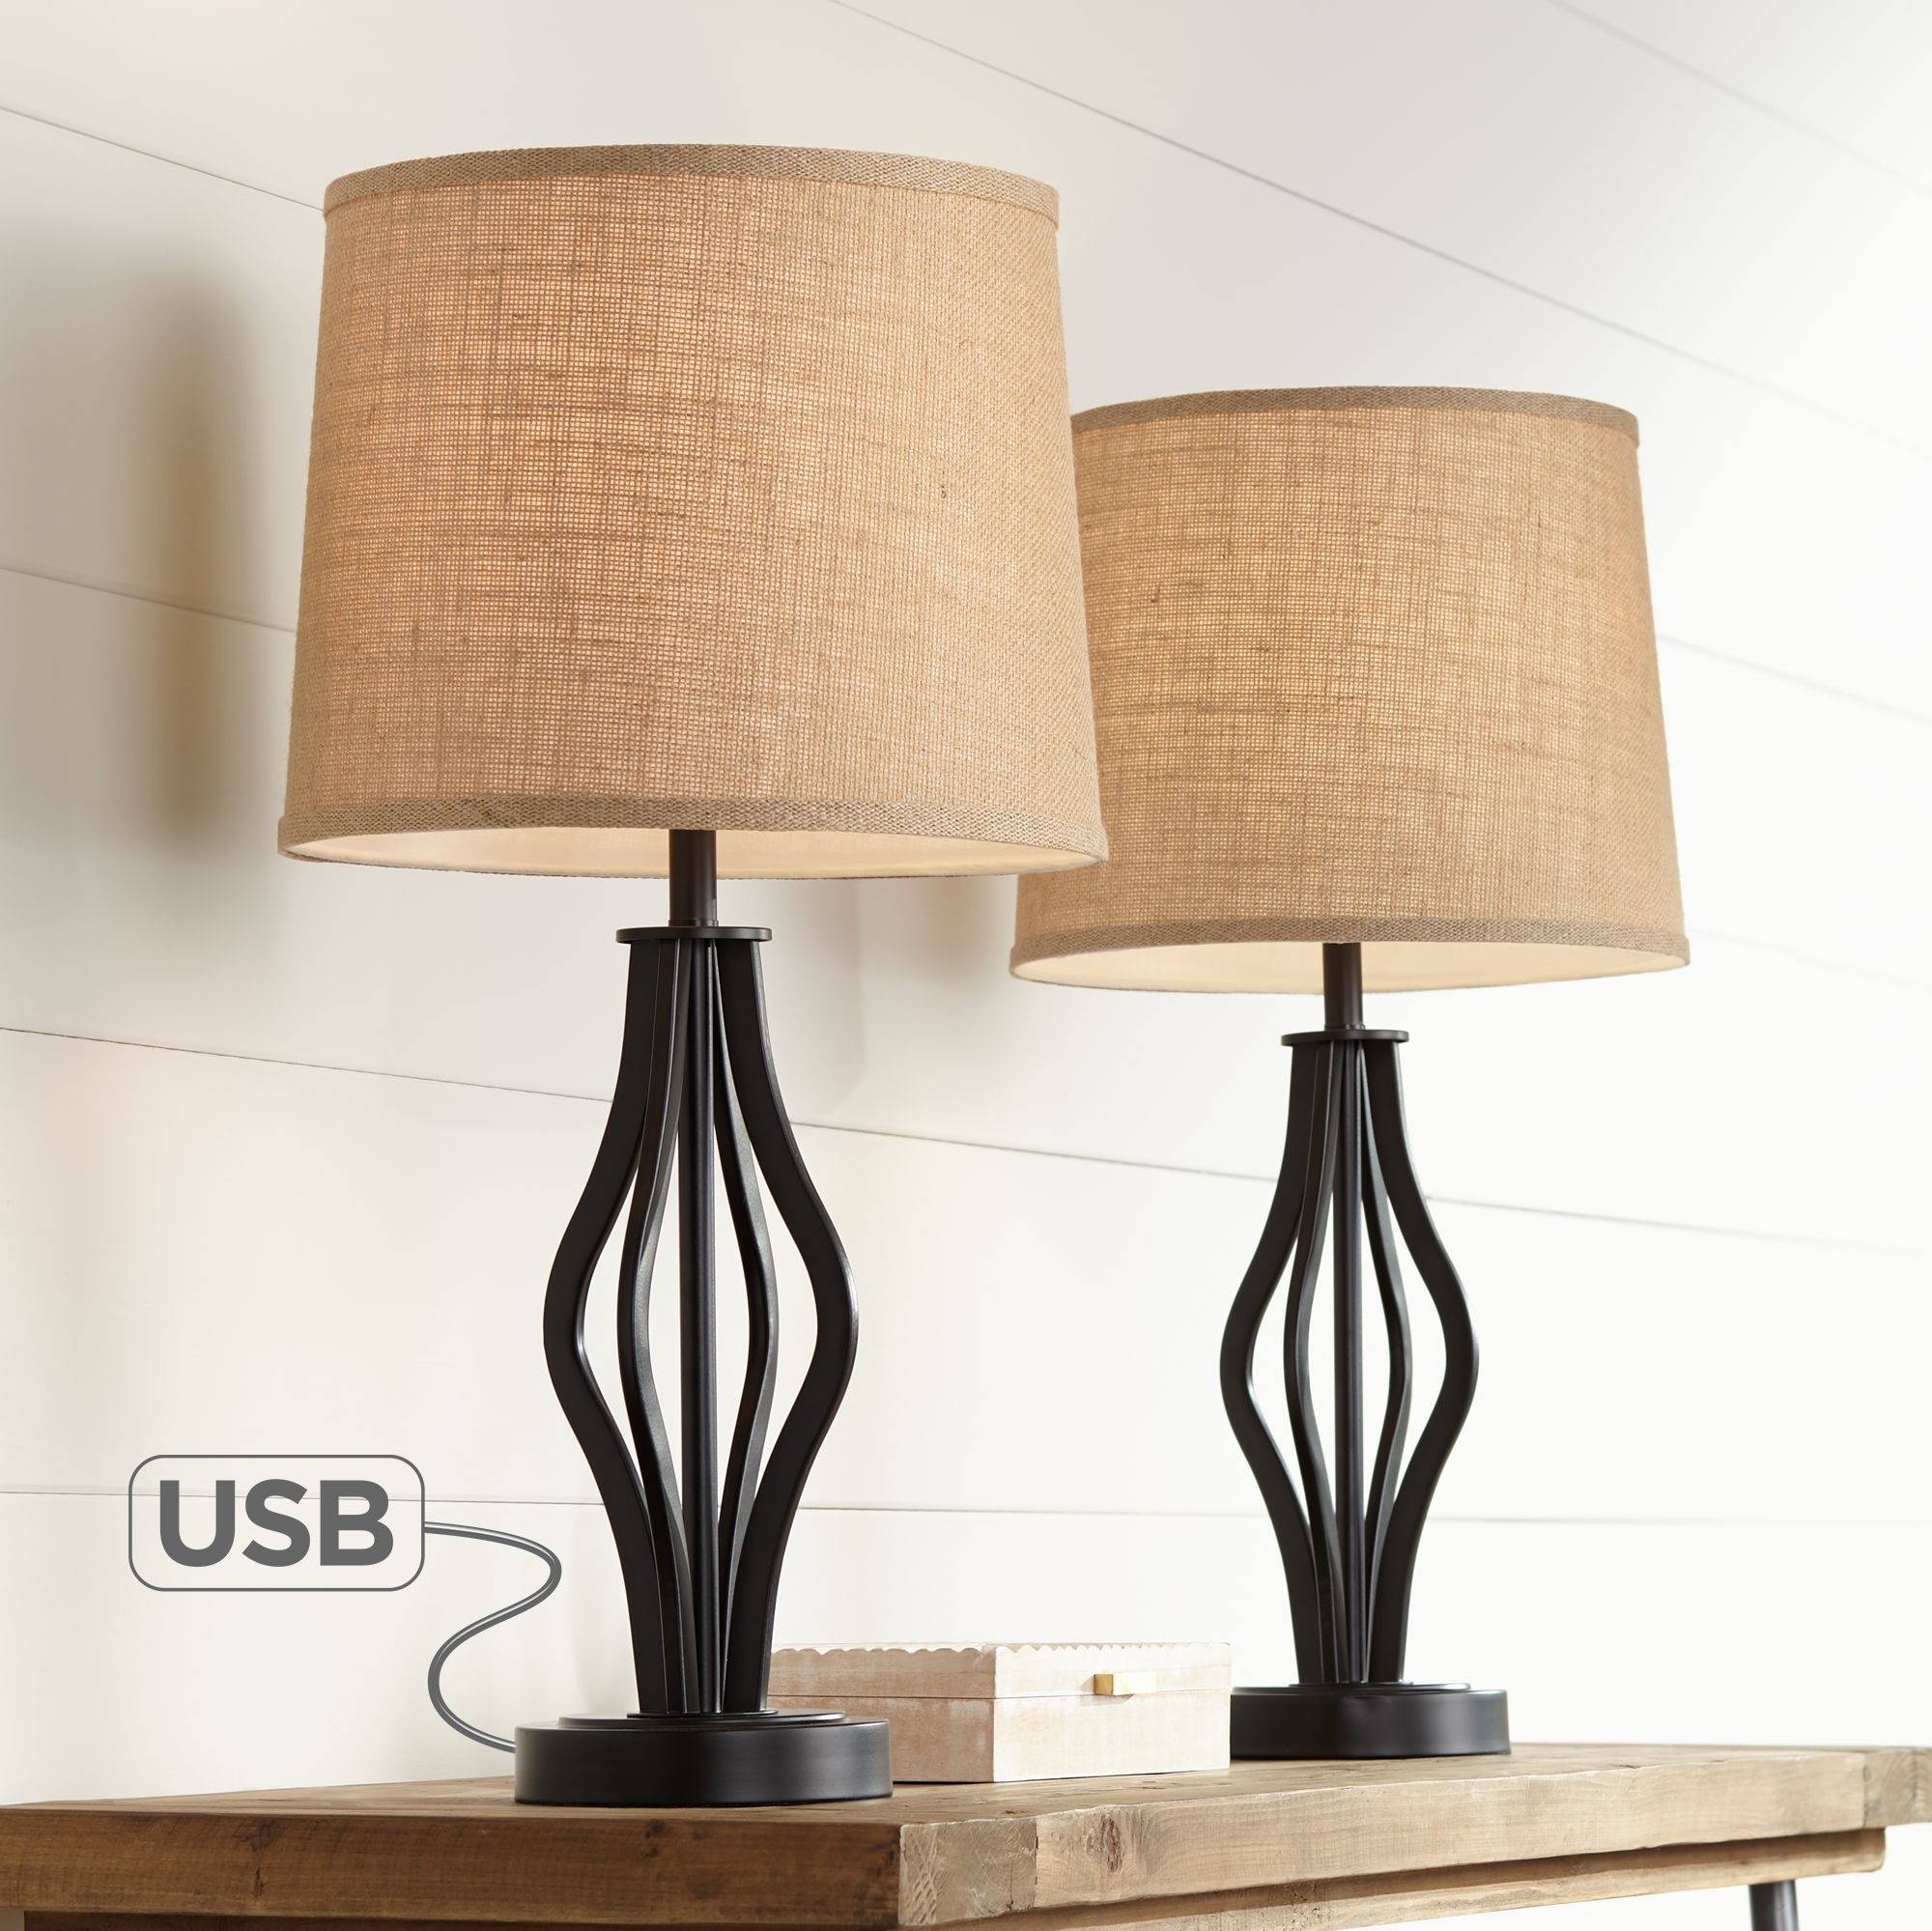 Ironing table lamps